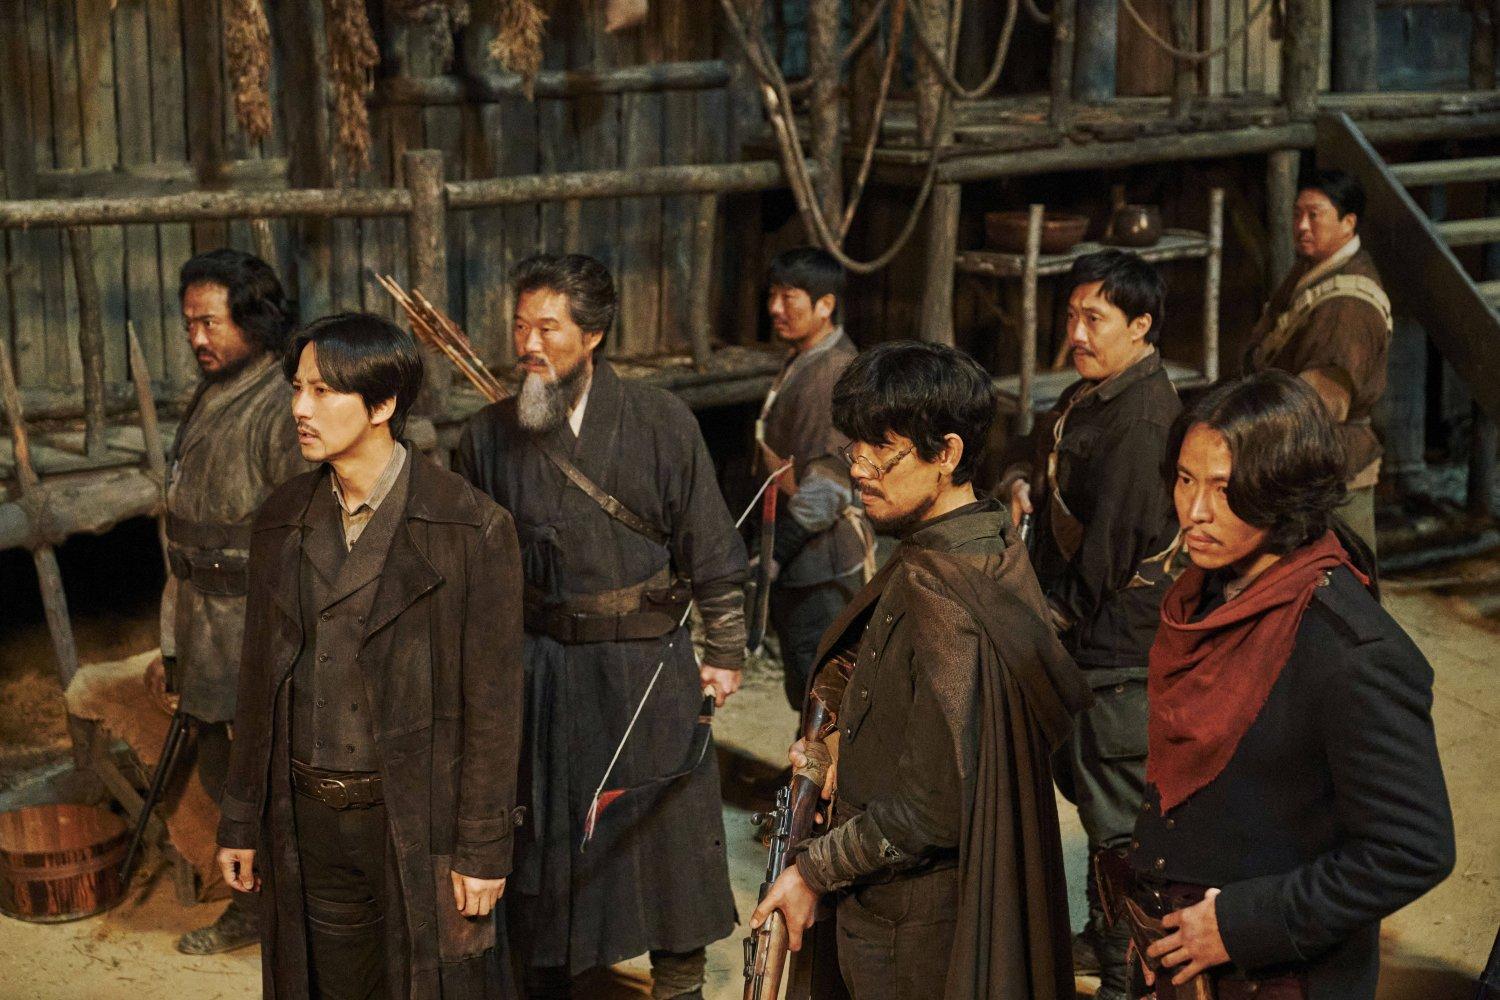  The story revolves around the intense clash between Japanese forces and the Korean Independence Army, while hitmen and rebellious bandits unite to protect their homeland and people. Kim Nam Gil, reflecting on the series, expressed curiosity about the powerful synergy that emerges when the historical backdrop intersects with the compelling narratives of individuals fighting passionately to safeguard their families.